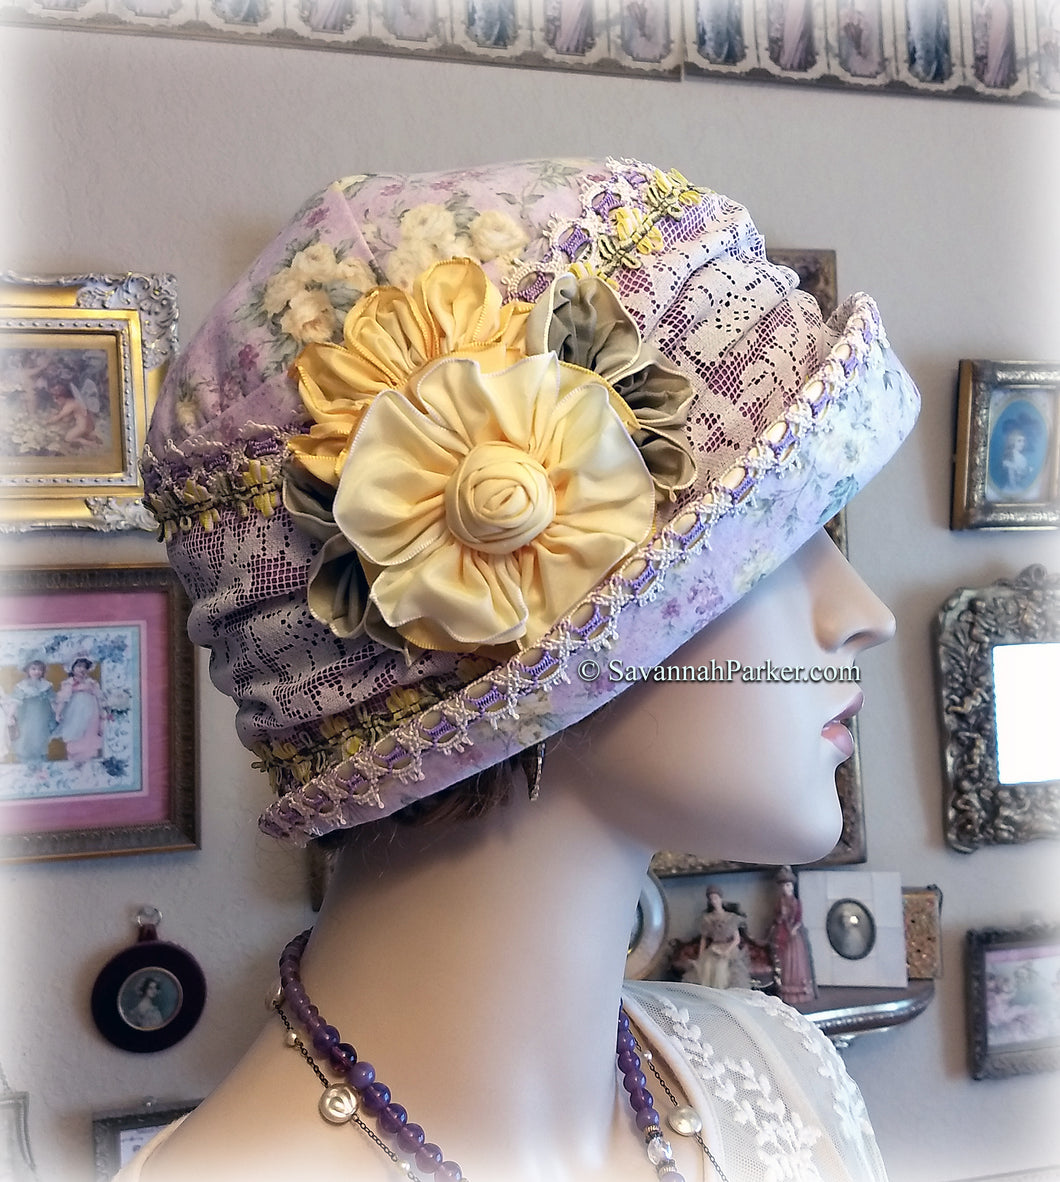 SOLD OUT 1920s Antique Style Gatsby Flapper Hat Downton Abbey Lavender and Yellow Summer Cloche Hat - Ready to Ship - Antique Lace -Ribbonwork Flower